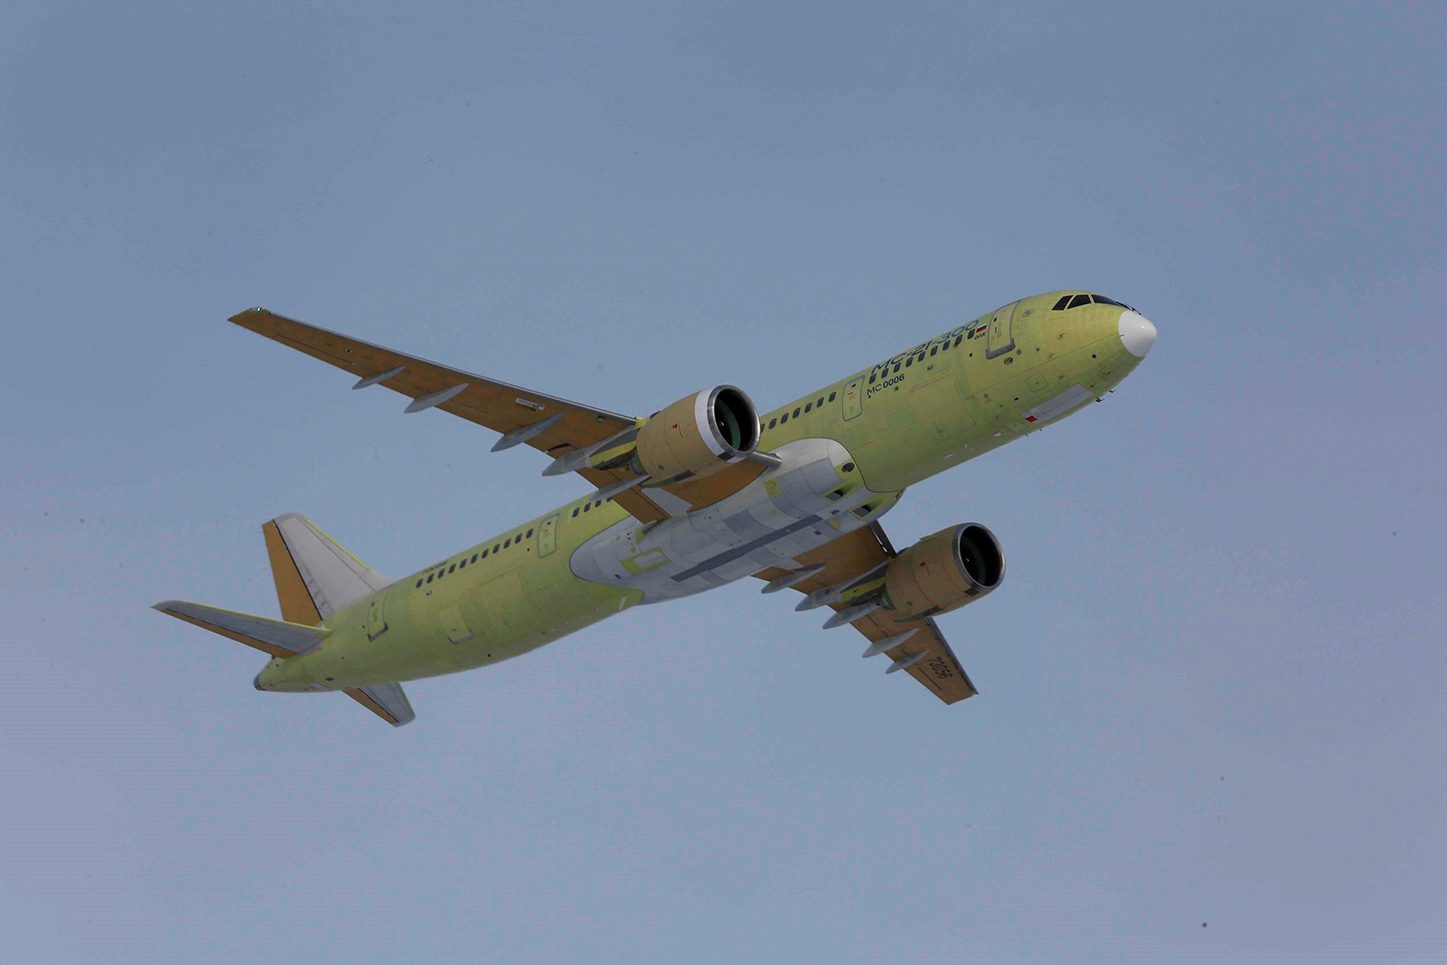 The fourth MC-21-300 aircraft joined the flight test program